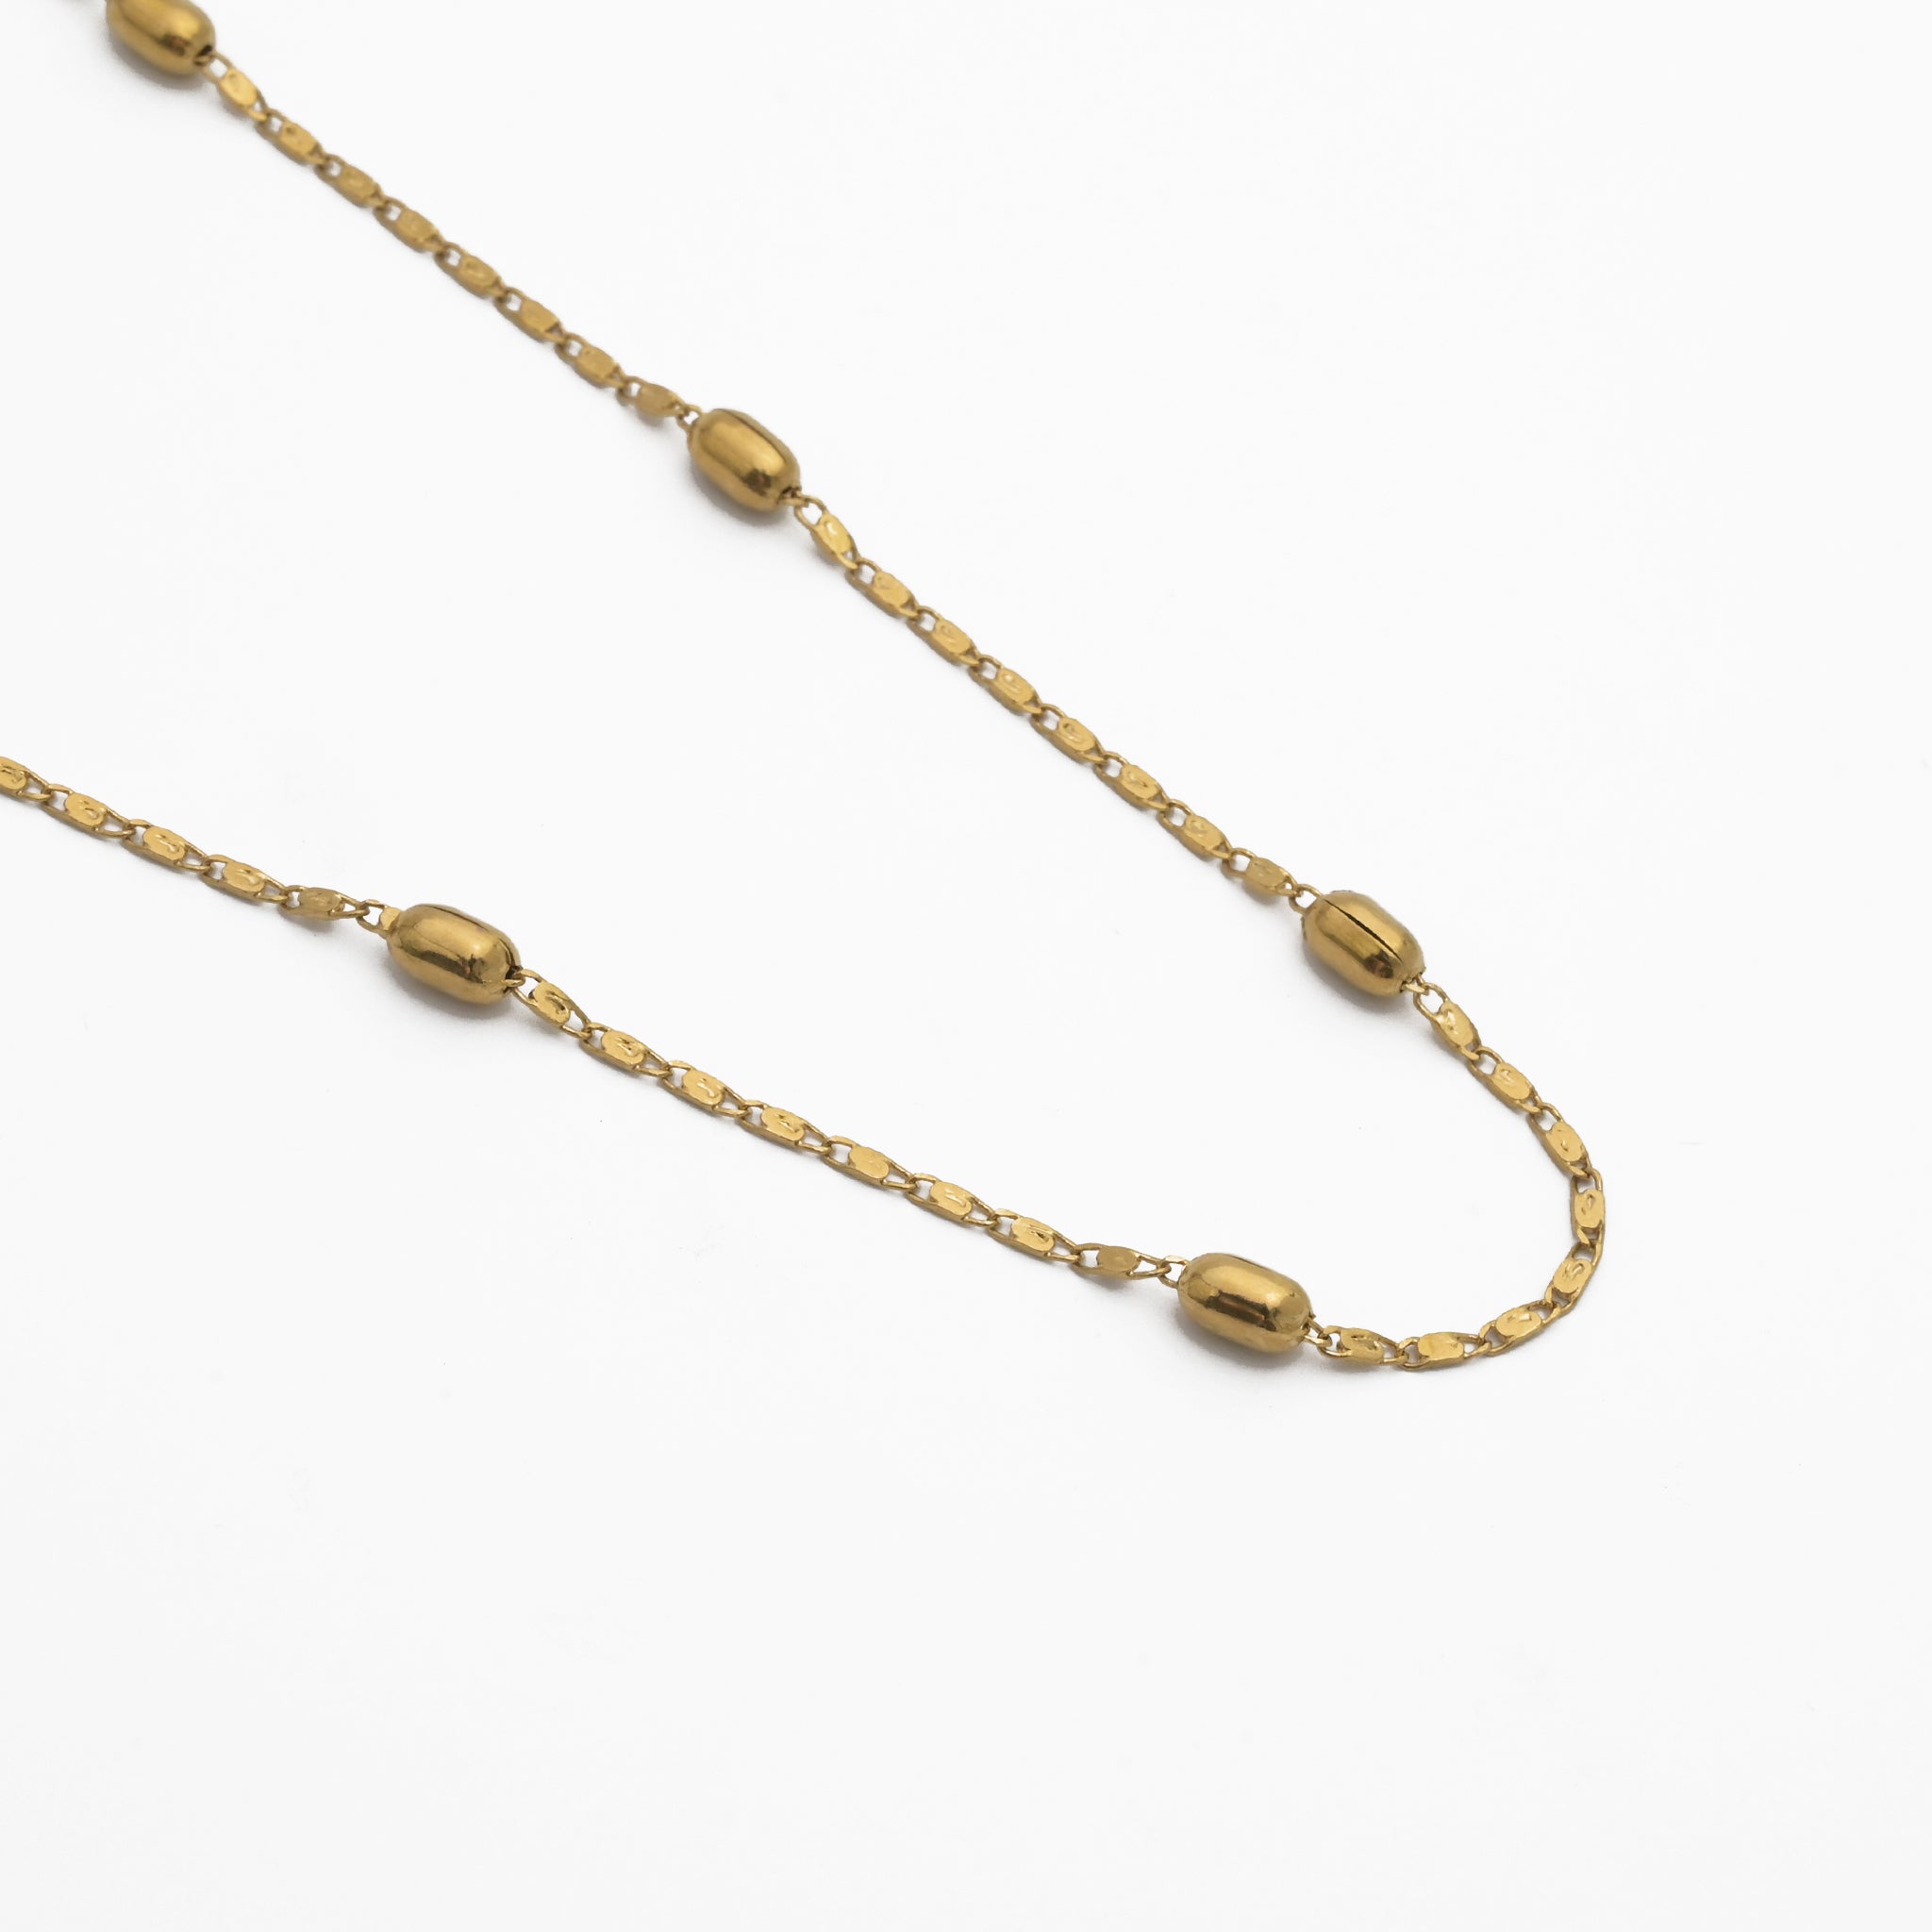 Antique Gold and Enamel Slavery Necklace | Penelope Gallery